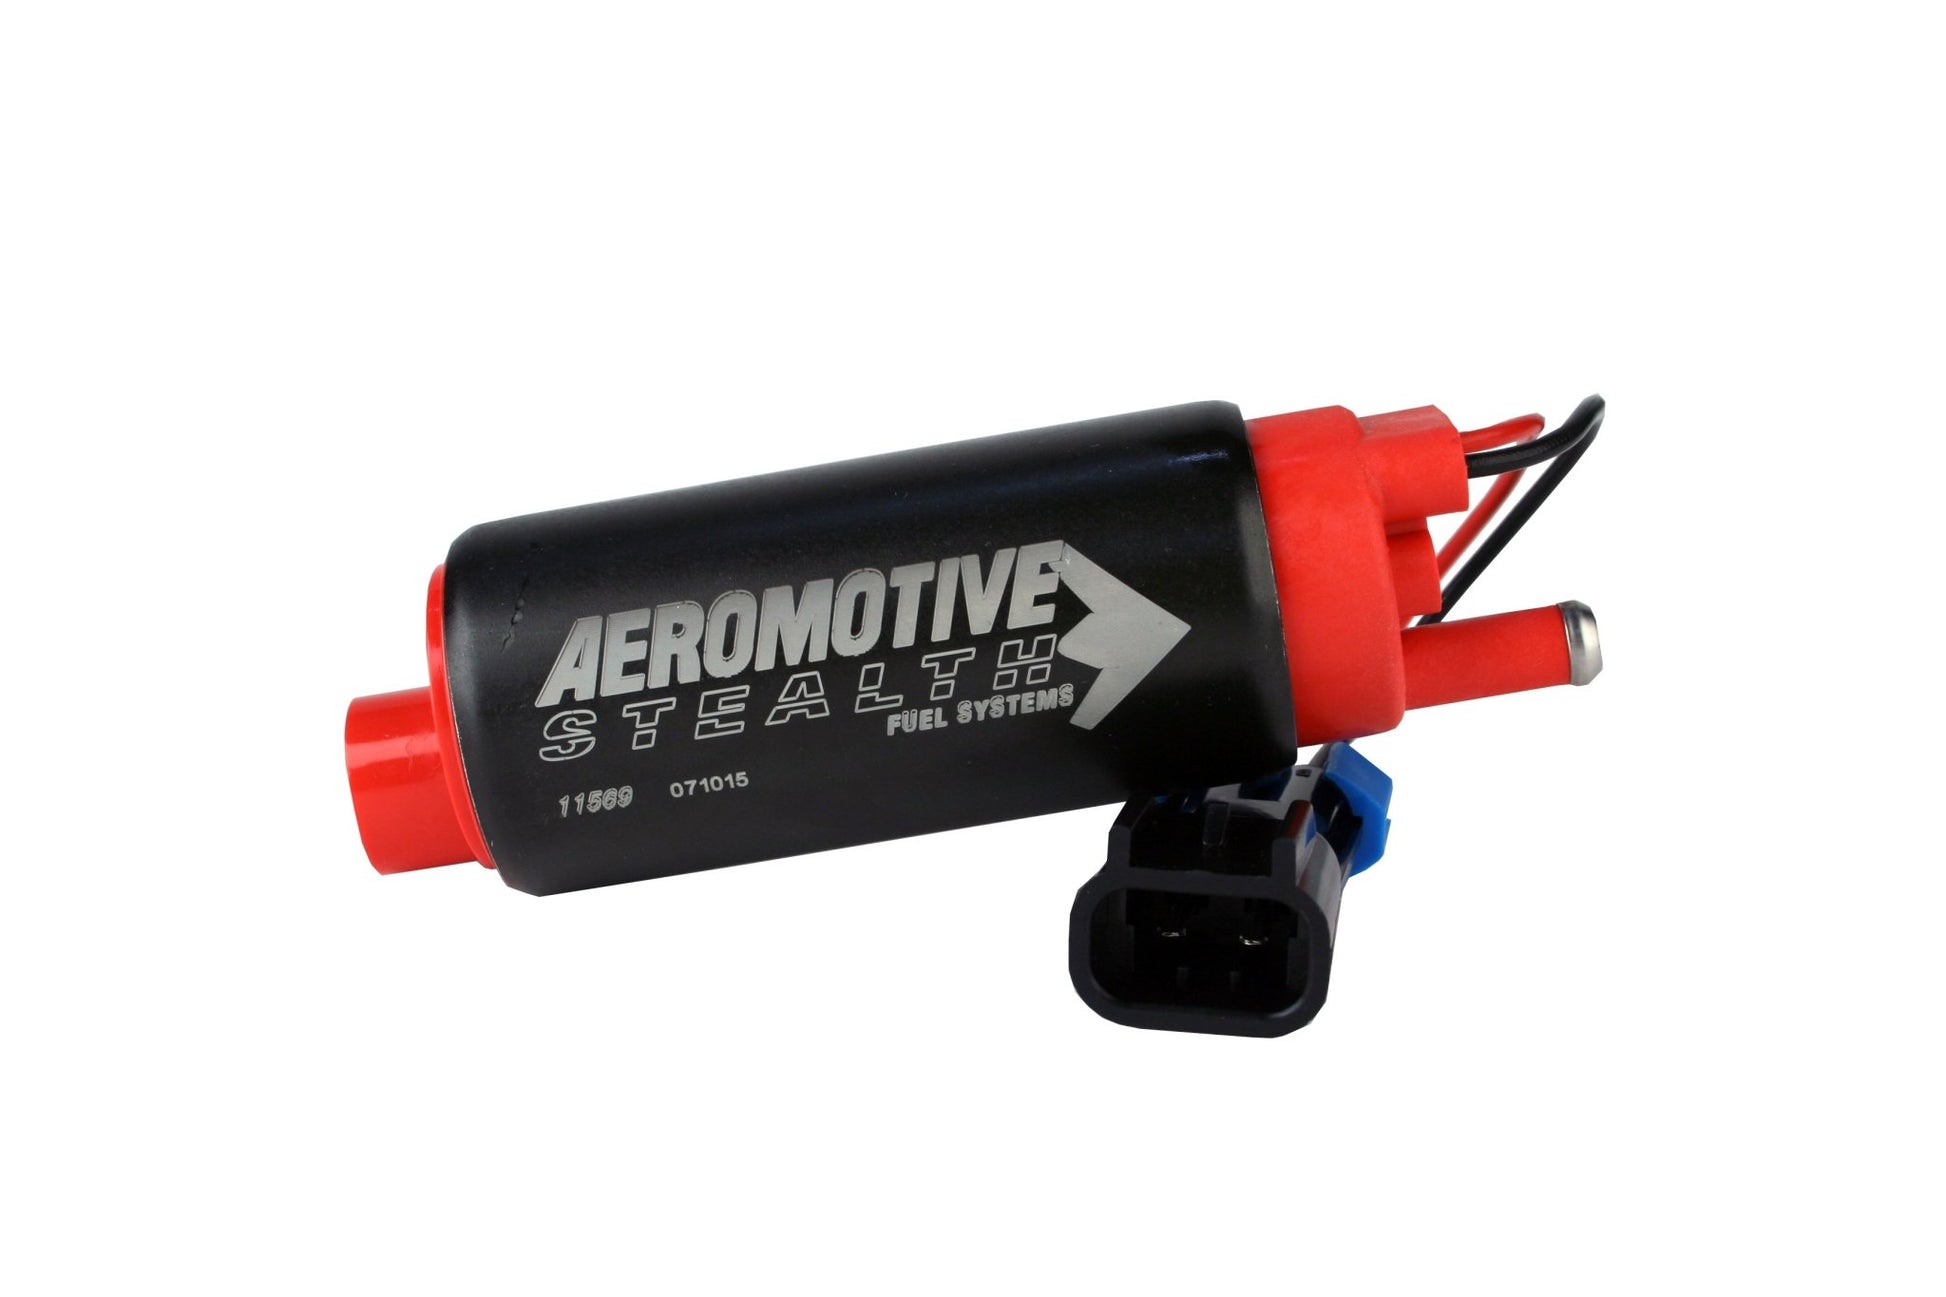 Aeromotive Stealth 340LPH In Tank fuel pump - Hot Rod fuel hose by One Guy Garage